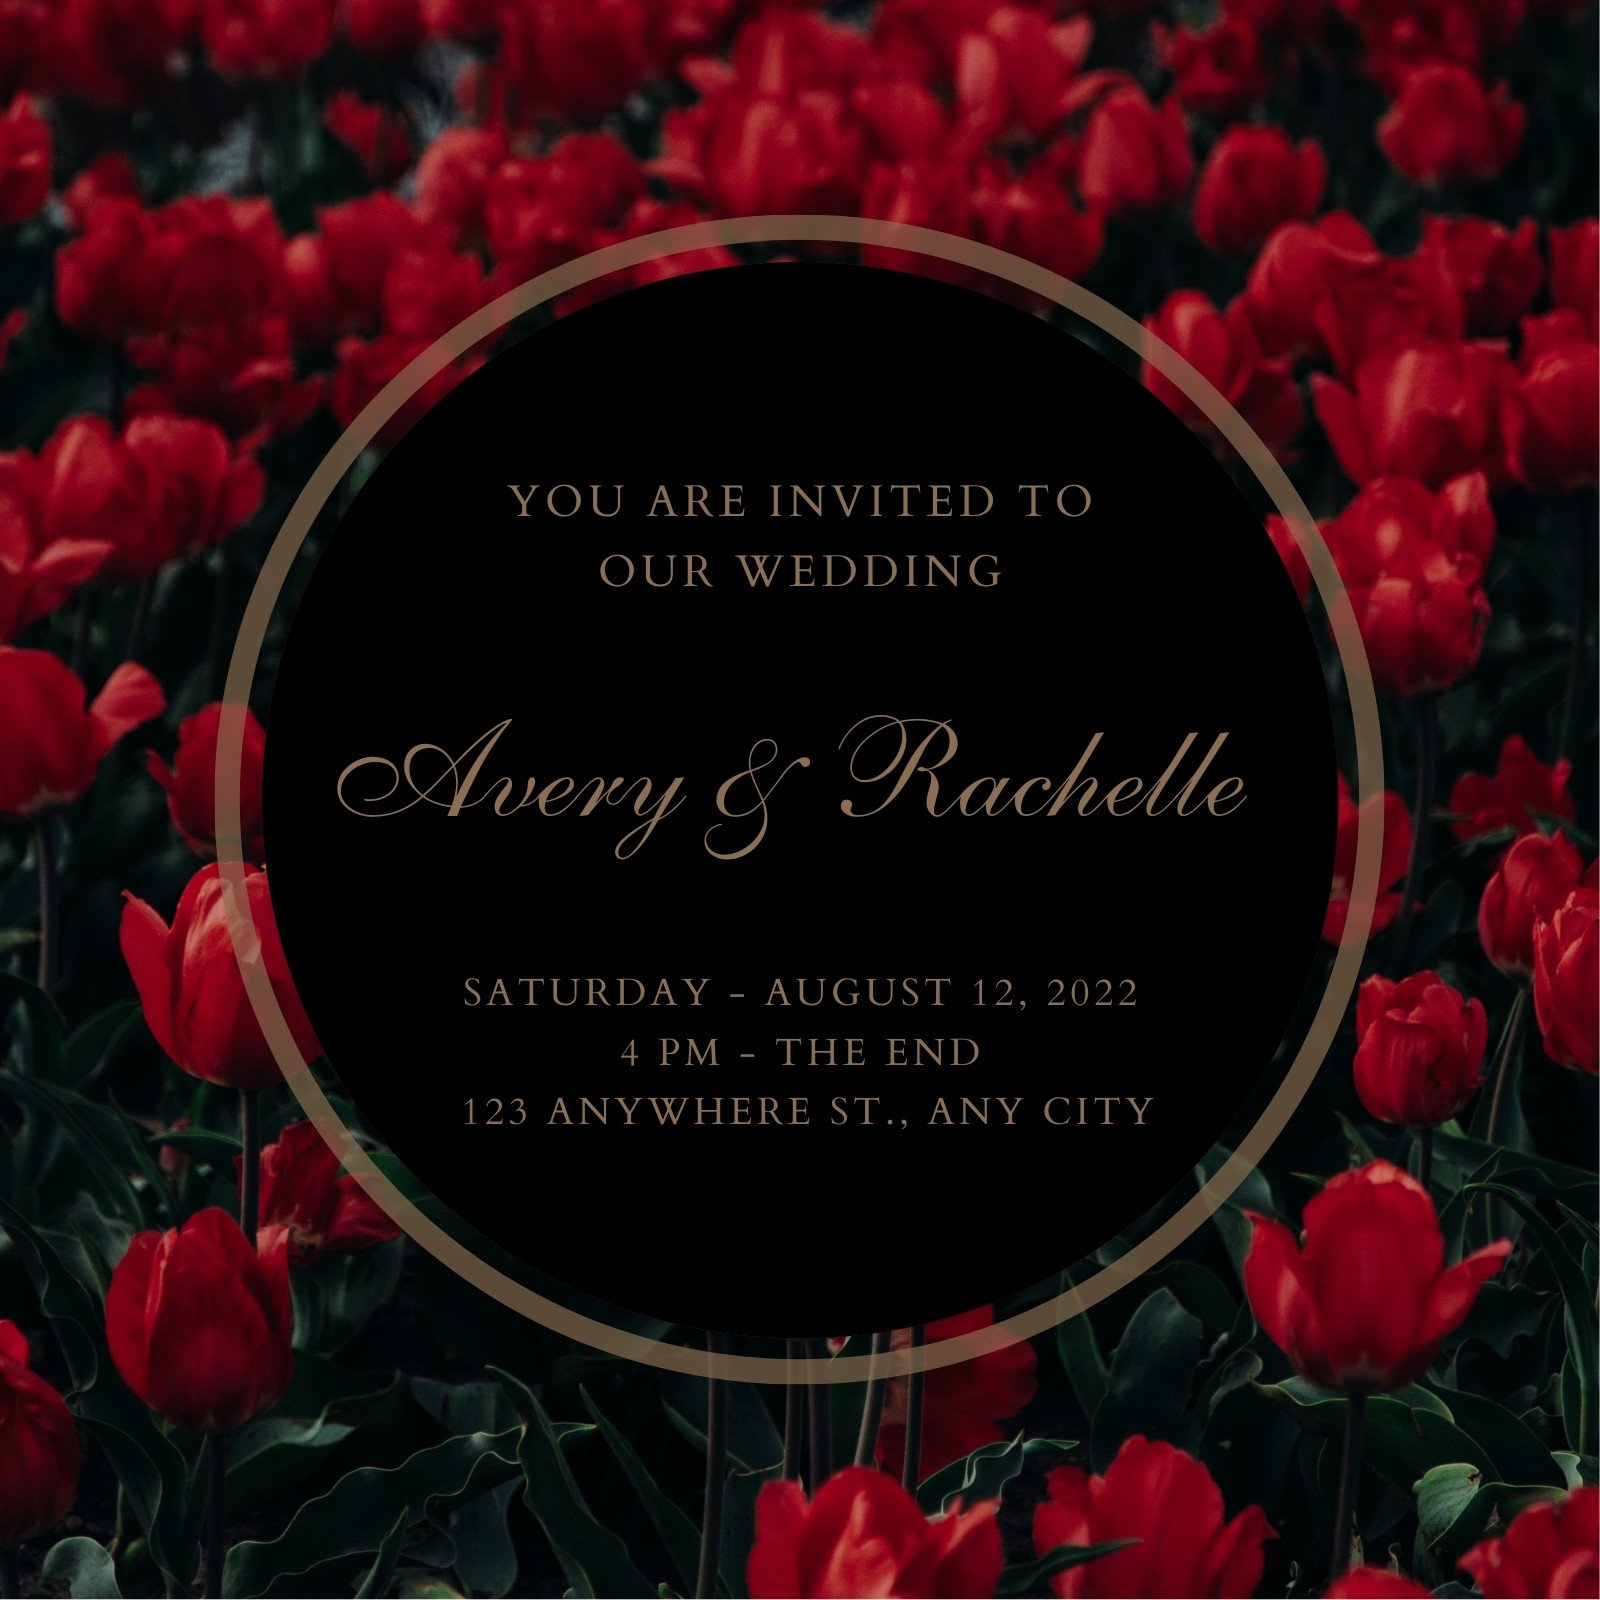 Page 7 - Wedding invitation templates to customize for free | Canva